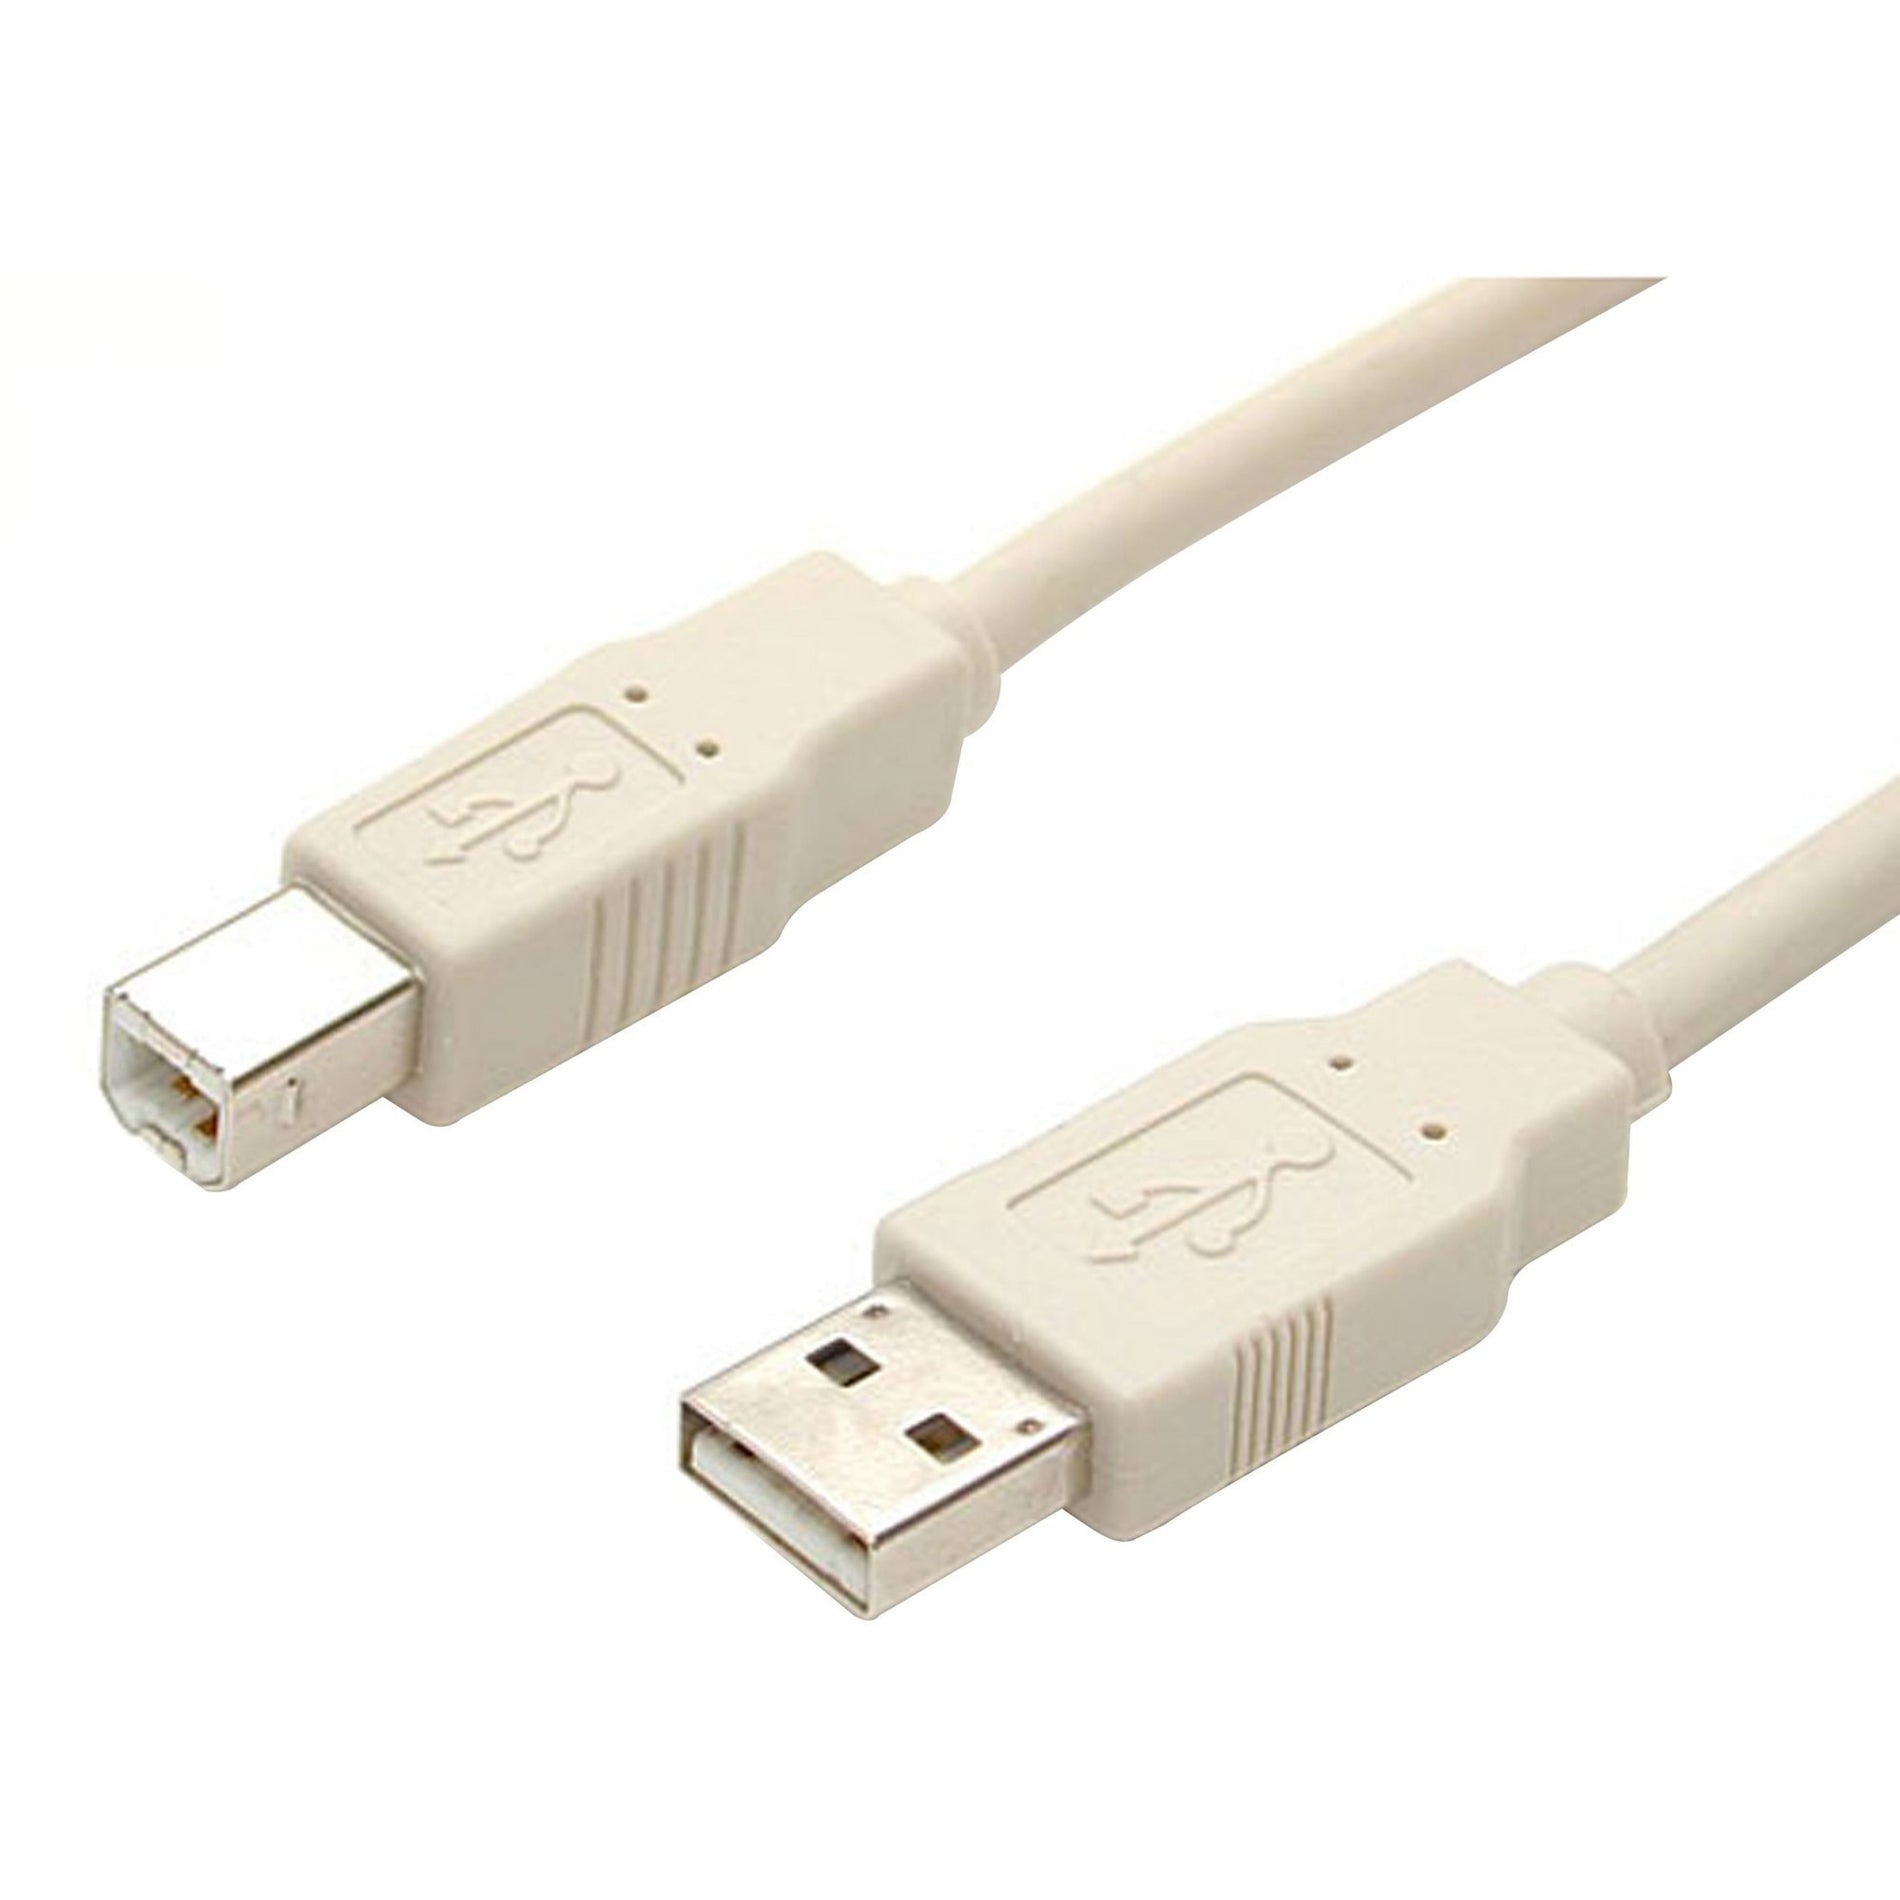 StarTech.com USBFAB_10 10 ft. Fully Rated USB Cable A-B, Data Transfer Cable, Printer, Scanner, USB Hub